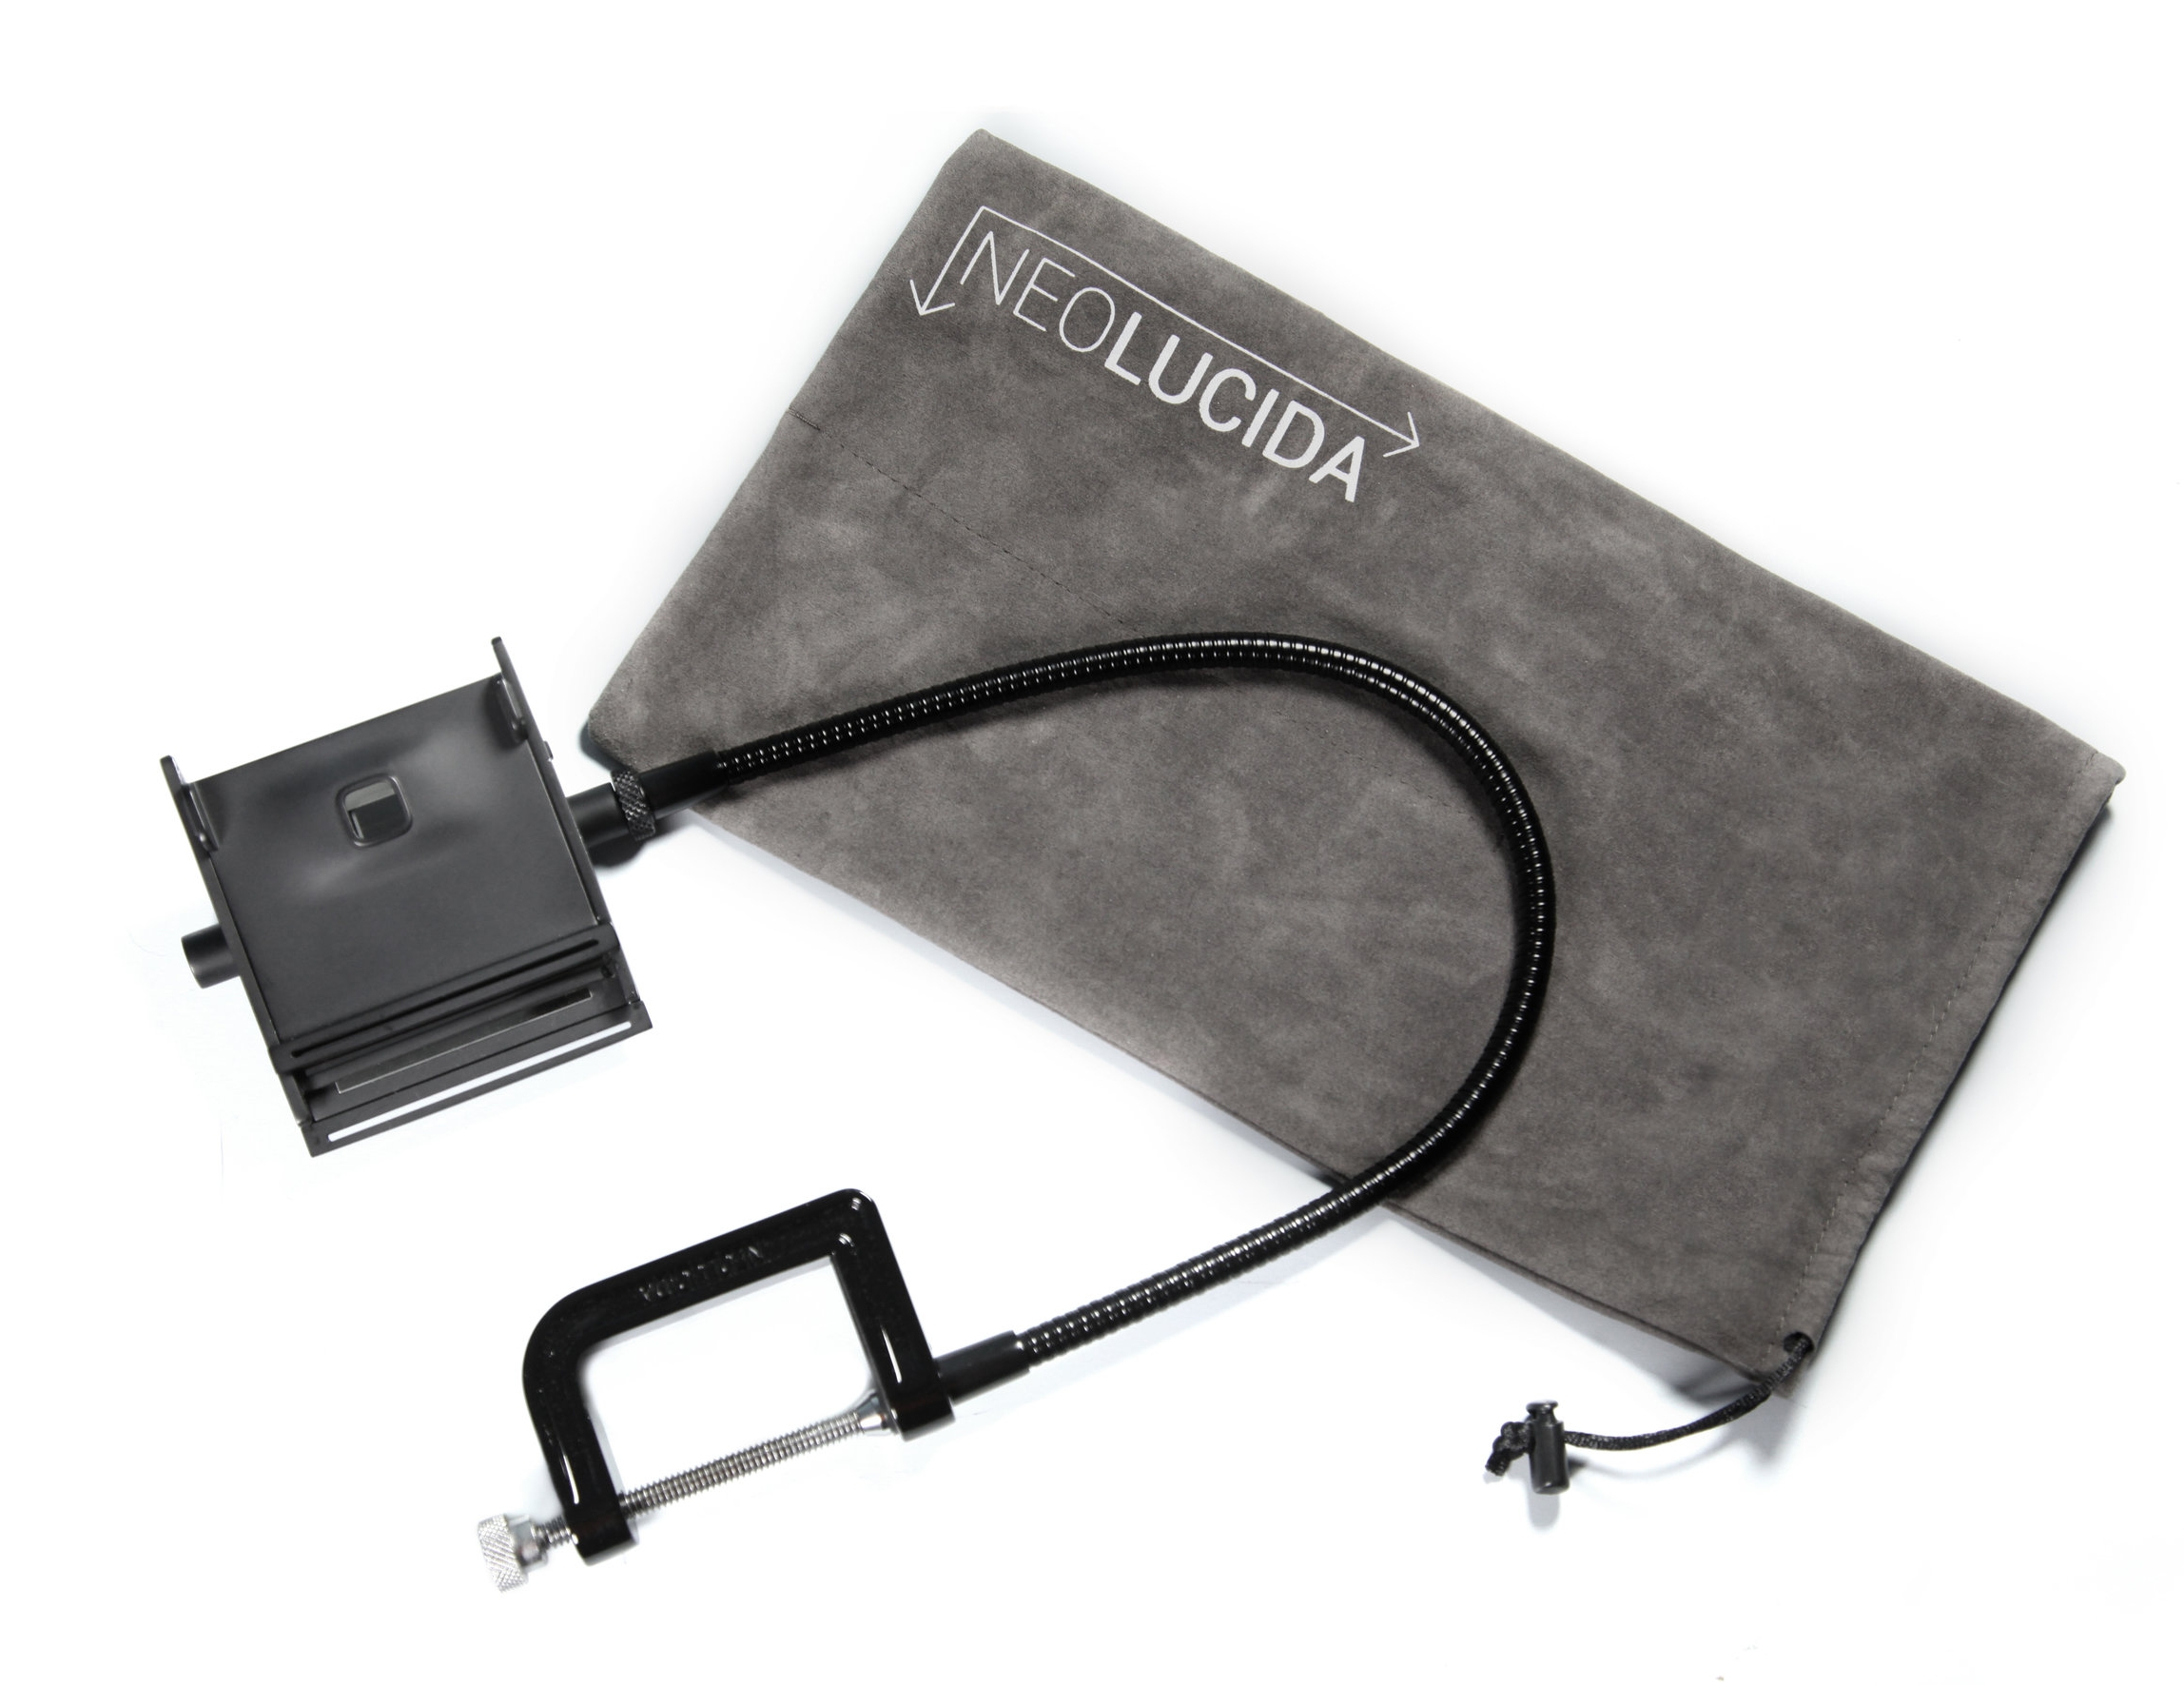  The NeoLucida XL fits into the custom pouch provided. 